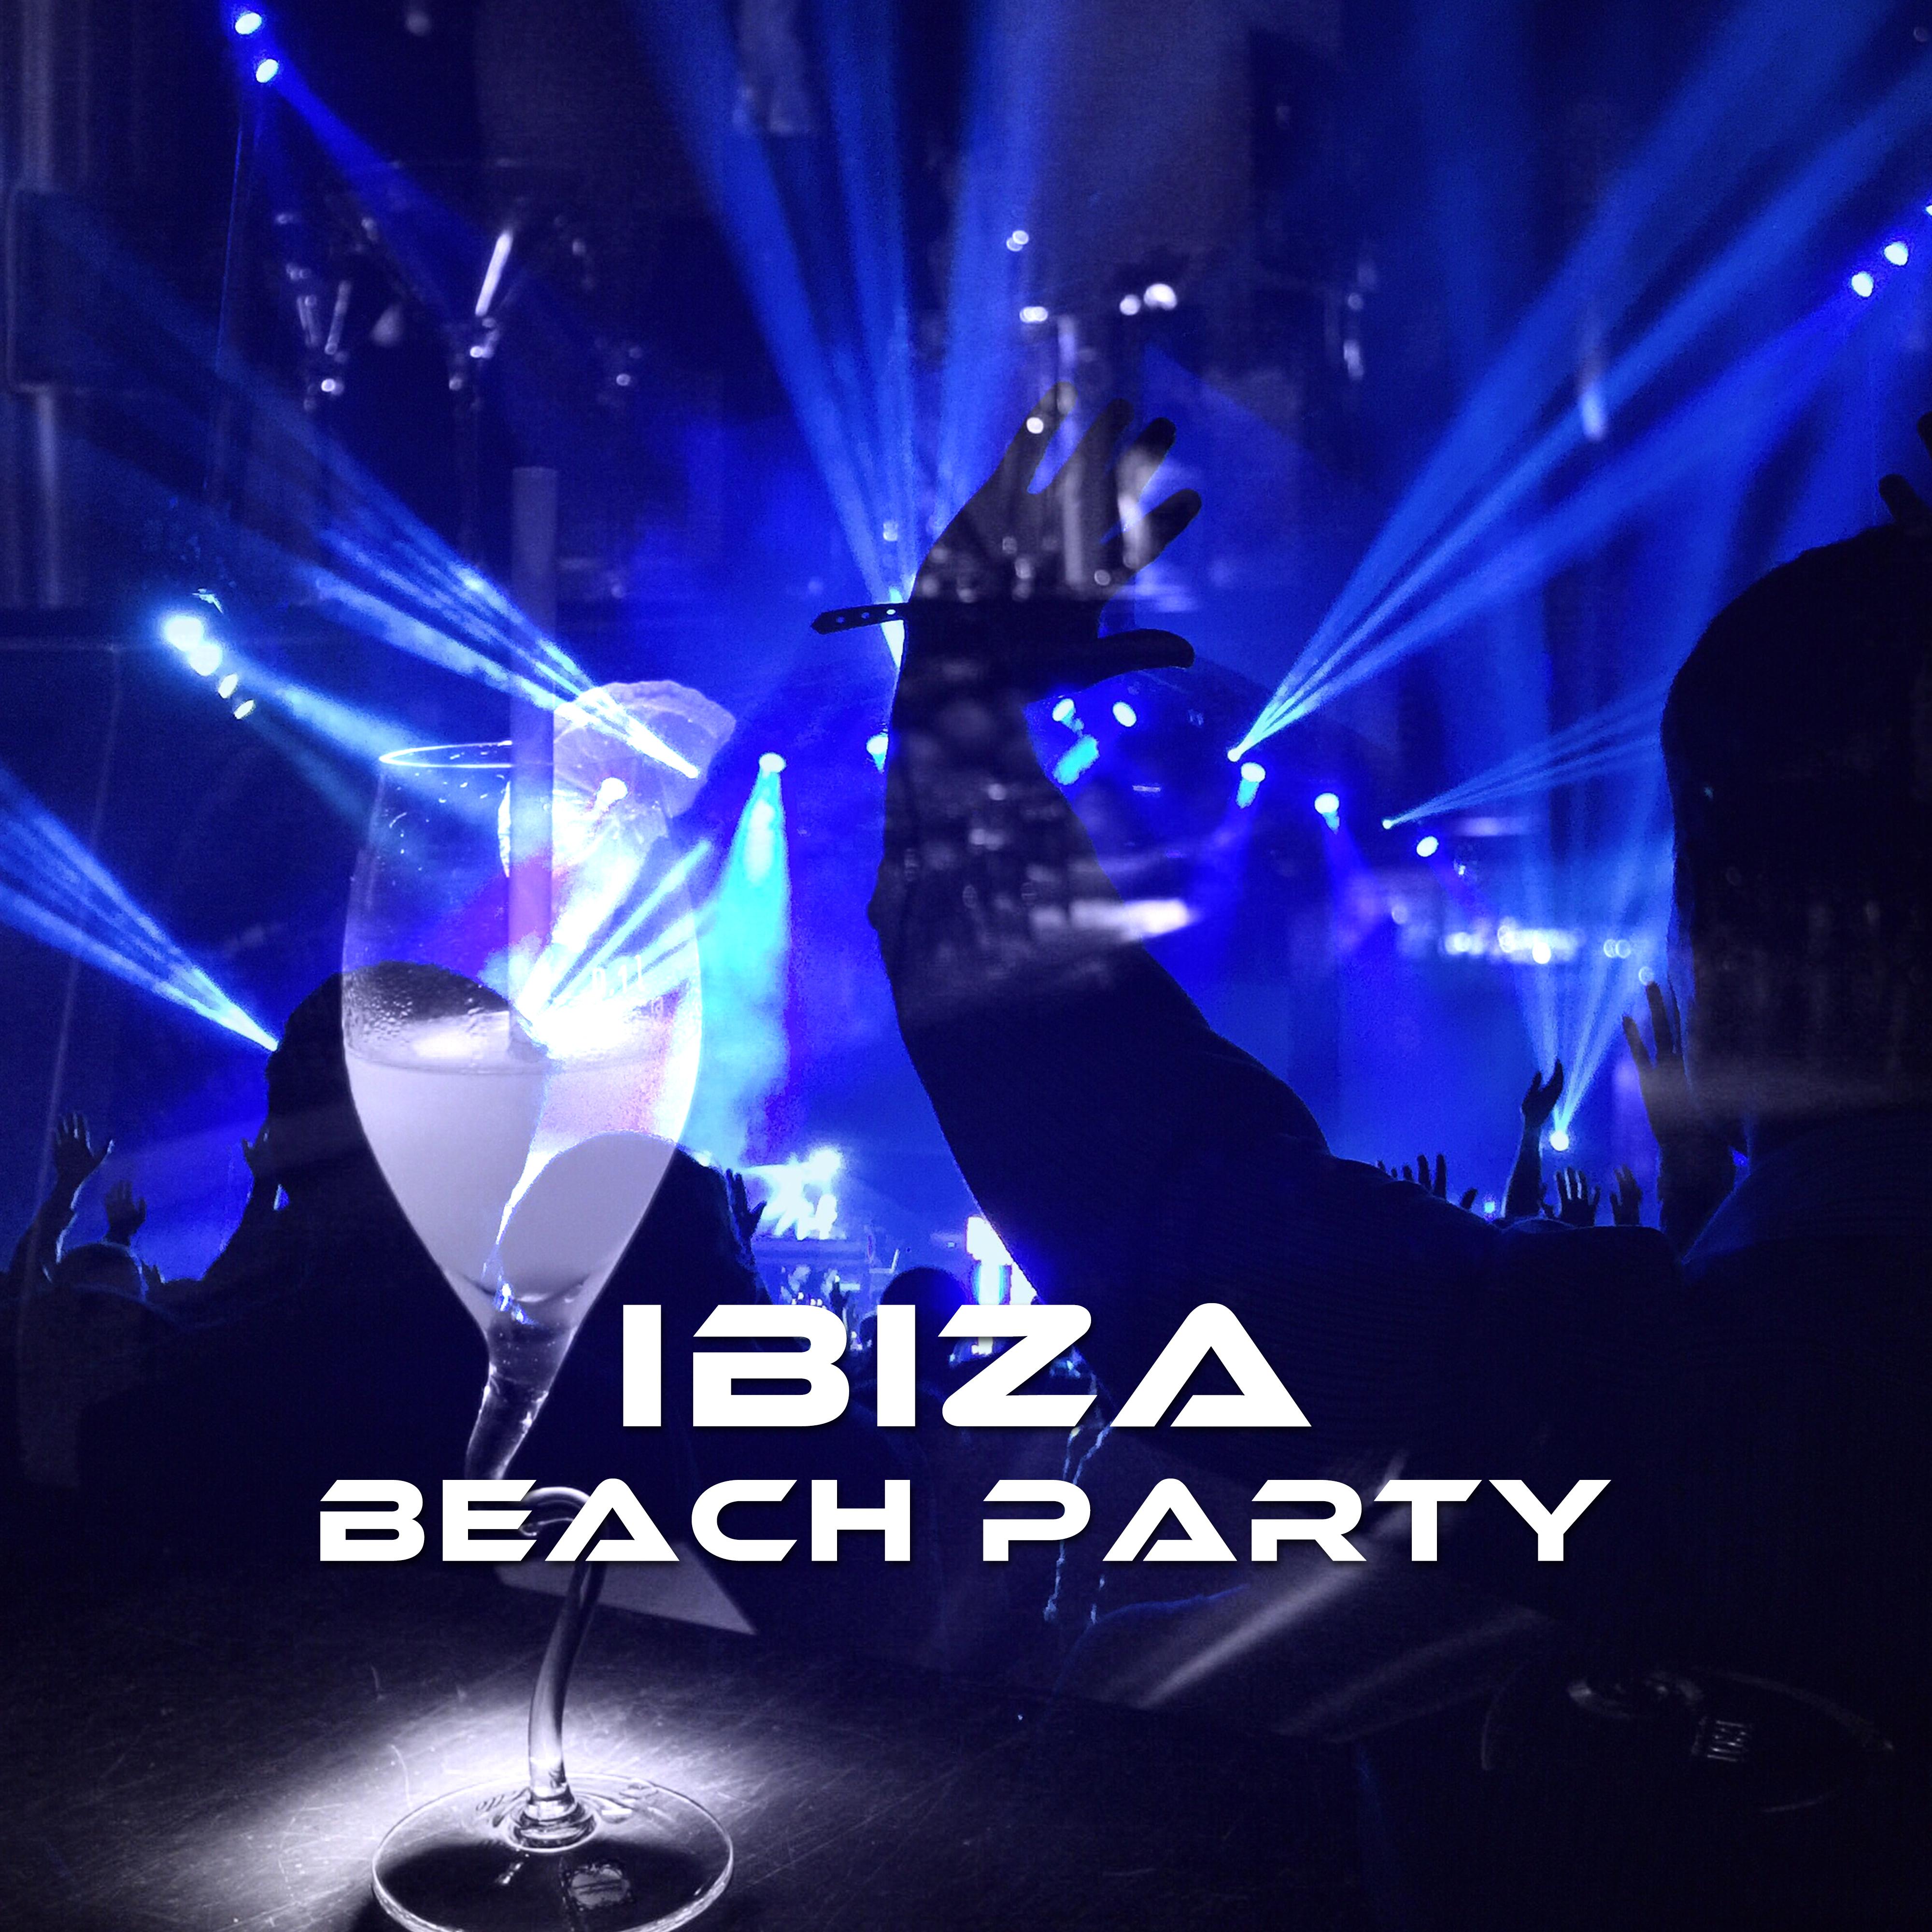 Ibiza Beach Party – Summer Hits, Chill Out Music, Relax, Fiesta, Dance Music, Hotel Lounge